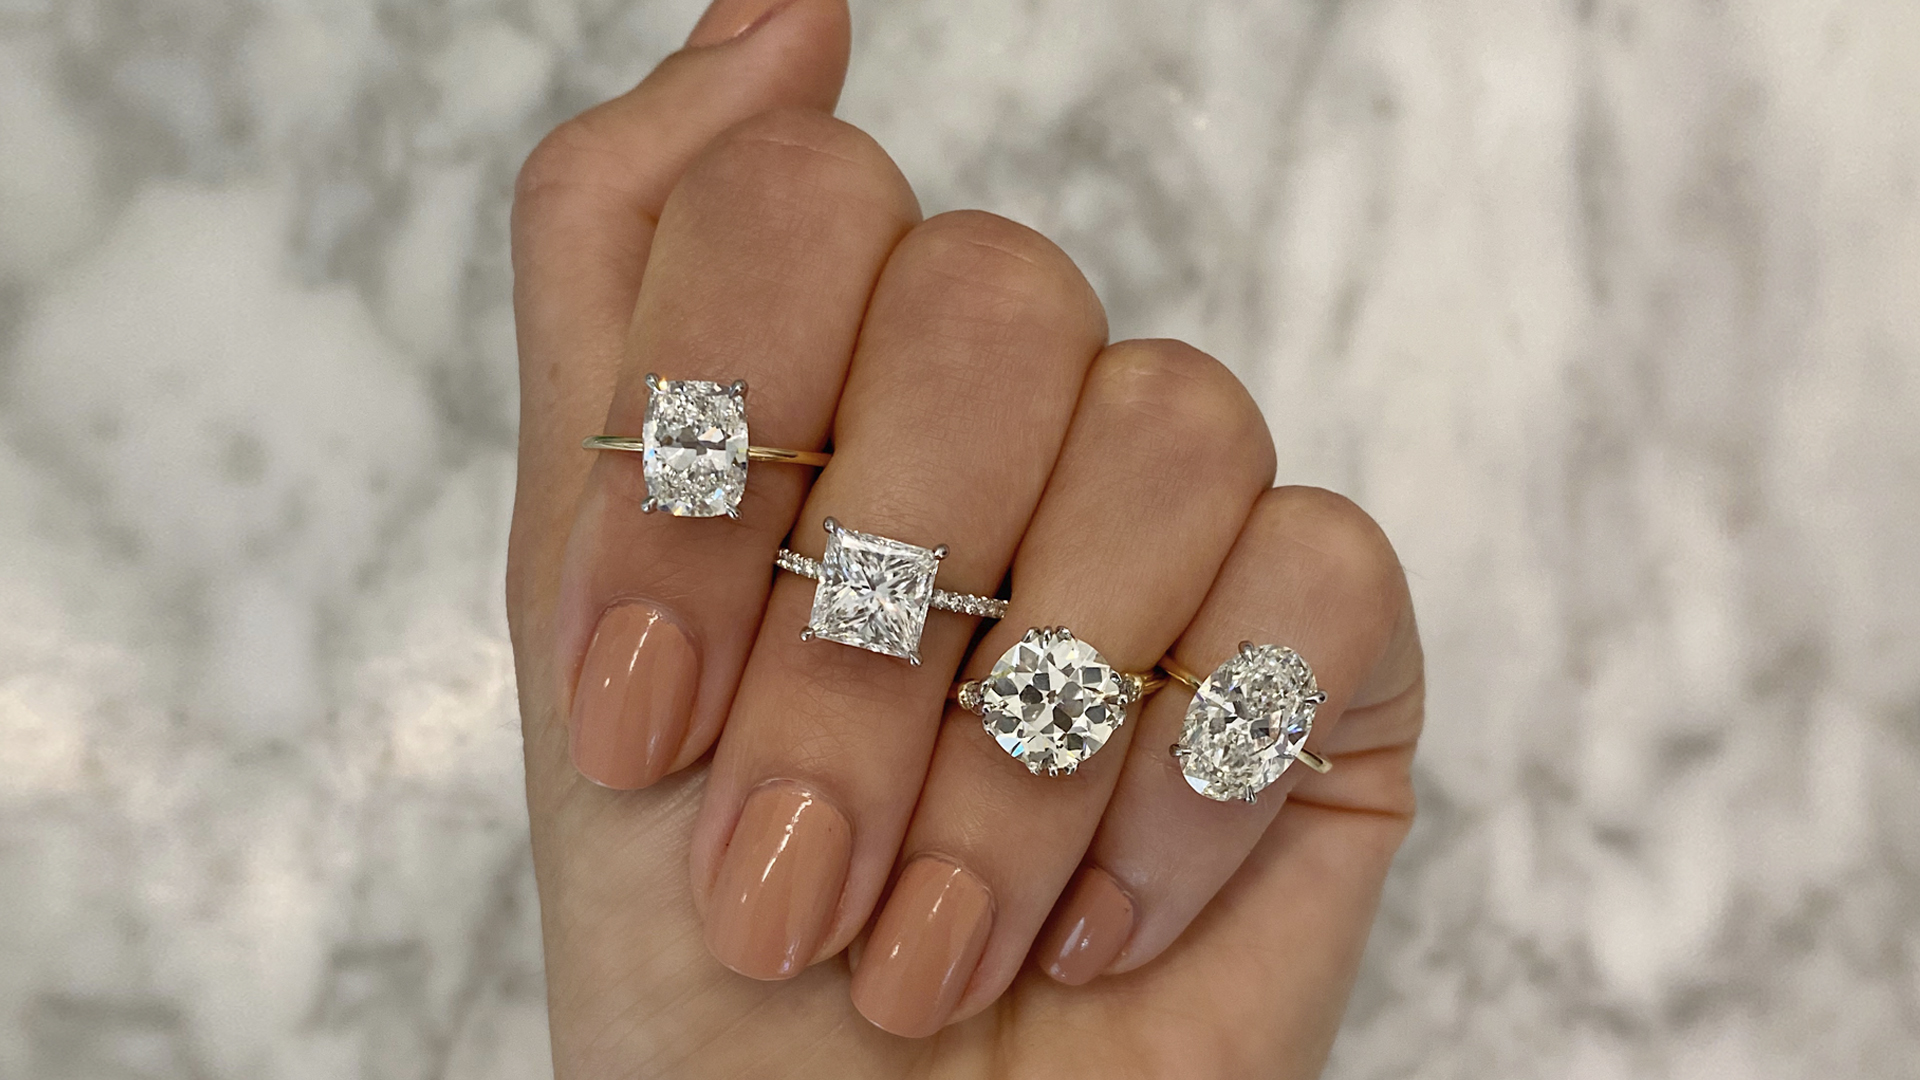 How to Design The Natural Diamond Engagement Ring of Your Dreams